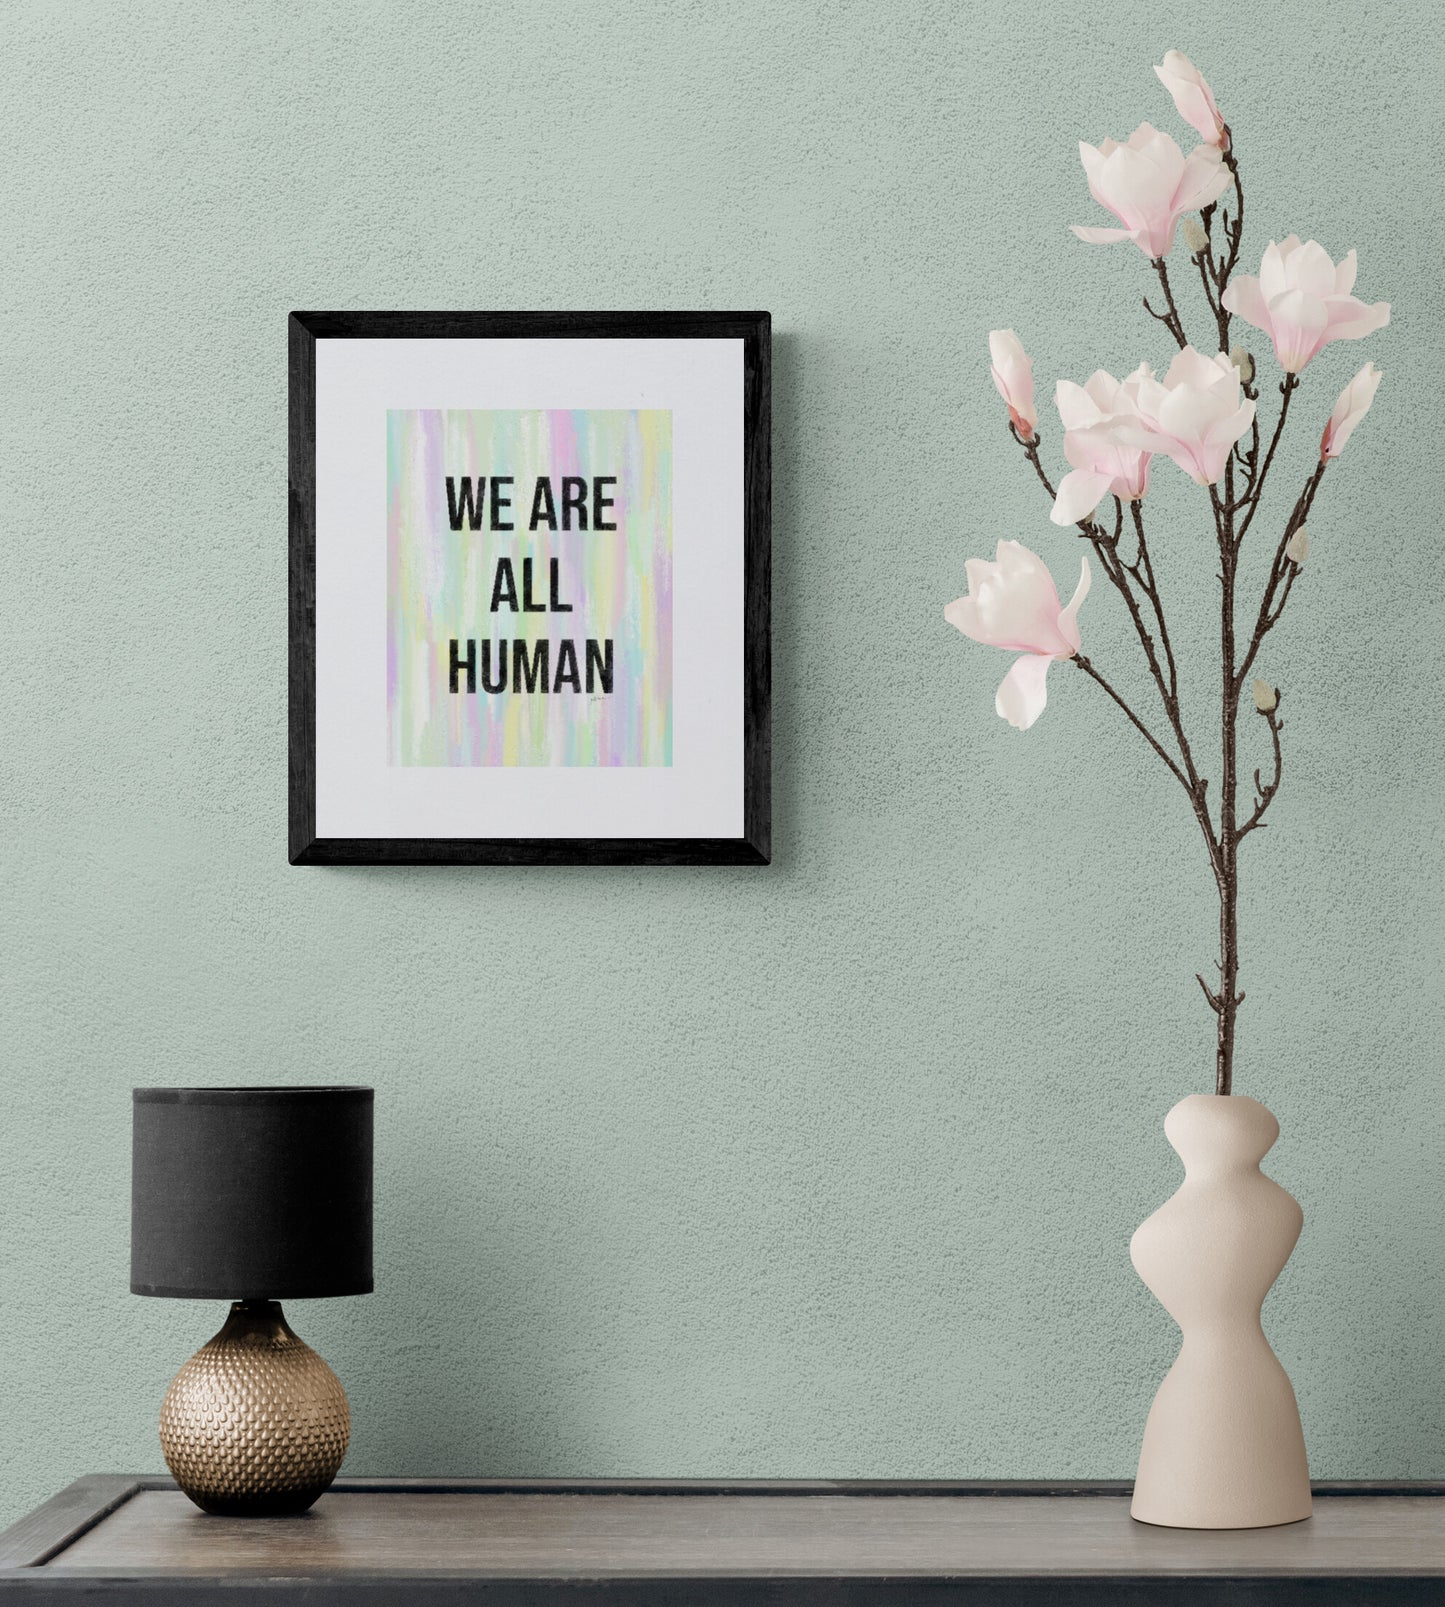 We Are All Human Inspirational Giclée Art Print 8” x 10” with Colorful Abstract Background